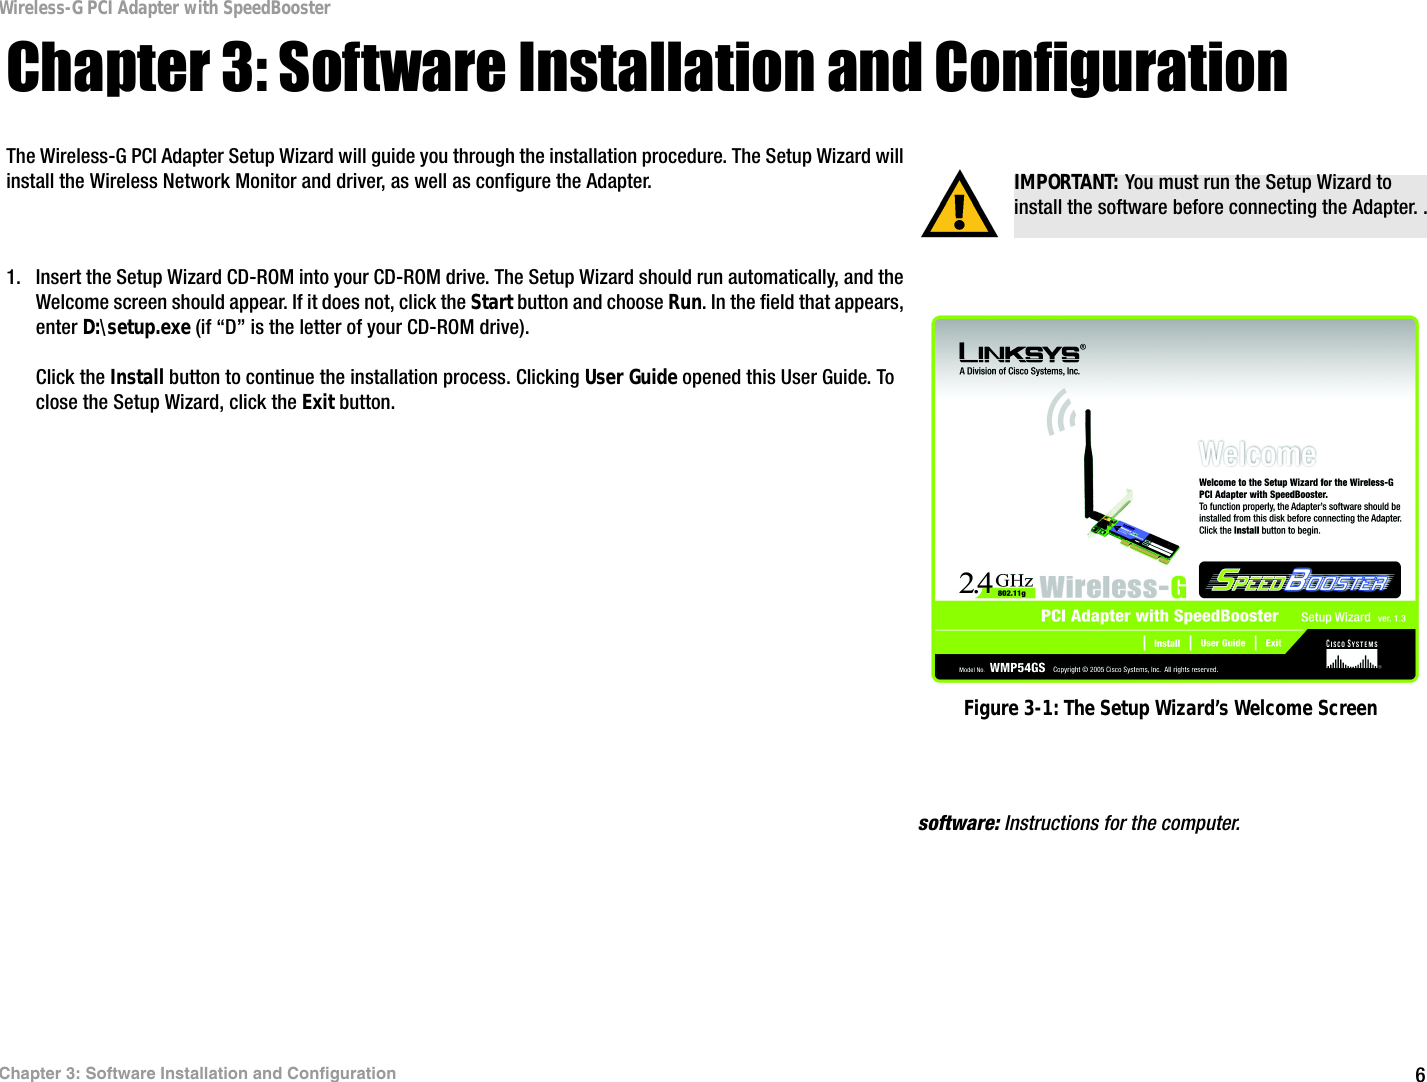 6Chapter 3: Software Installation and ConfigurationWireless-G PCI Adapter with SpeedBoosterChapter 3: Software Installation and ConfigurationThe Wireless-G PCI Adapter Setup Wizard will guide you through the installation procedure. The Setup Wizard will install the Wireless Network Monitor and driver, as well as configure the Adapter.1. Insert the Setup Wizard CD-ROM into your CD-ROM drive. The Setup Wizard should run automatically, and the Welcome screen should appear. If it does not, click the Start button and choose Run. In the field that appears, enter D:\setup.exe (if “D” is the letter of your CD-ROM drive).Click the Install button to continue the installation process. Clicking User Guide opened this User Guide. To close the Setup Wizard, click the Exit button. IMPORTANT: You must run the Setup Wizard to install the software before connecting the Adapter. .Figure 3-1: The Setup Wizard’s Welcome Screensoftware: Instructions for the computer. 